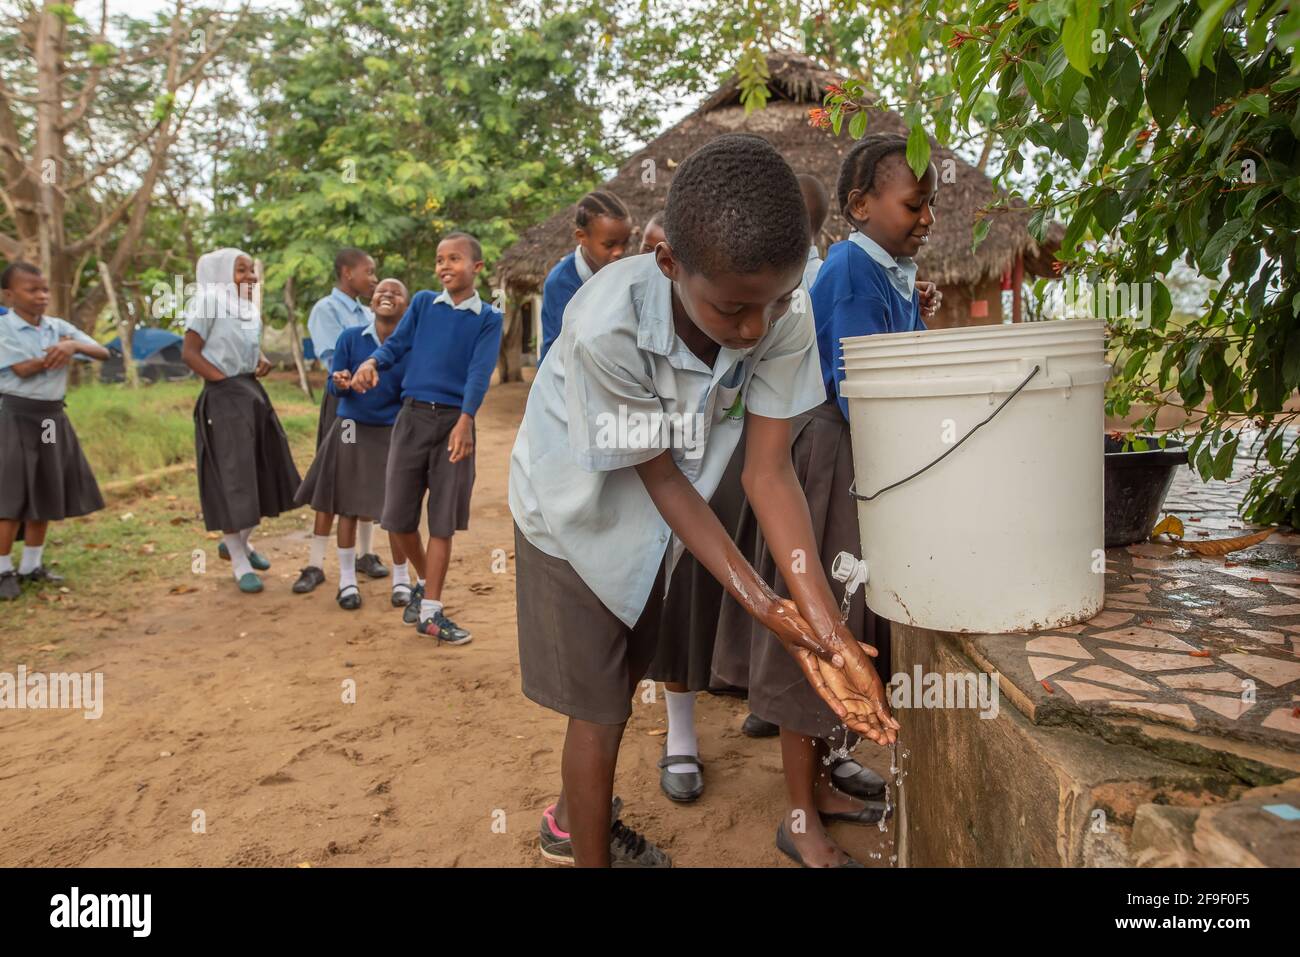 Dodoma, Tanzania. 08-18-2019. An african boy is washing hands while other students are having fun while waiting in line for their turn. Stock Photo